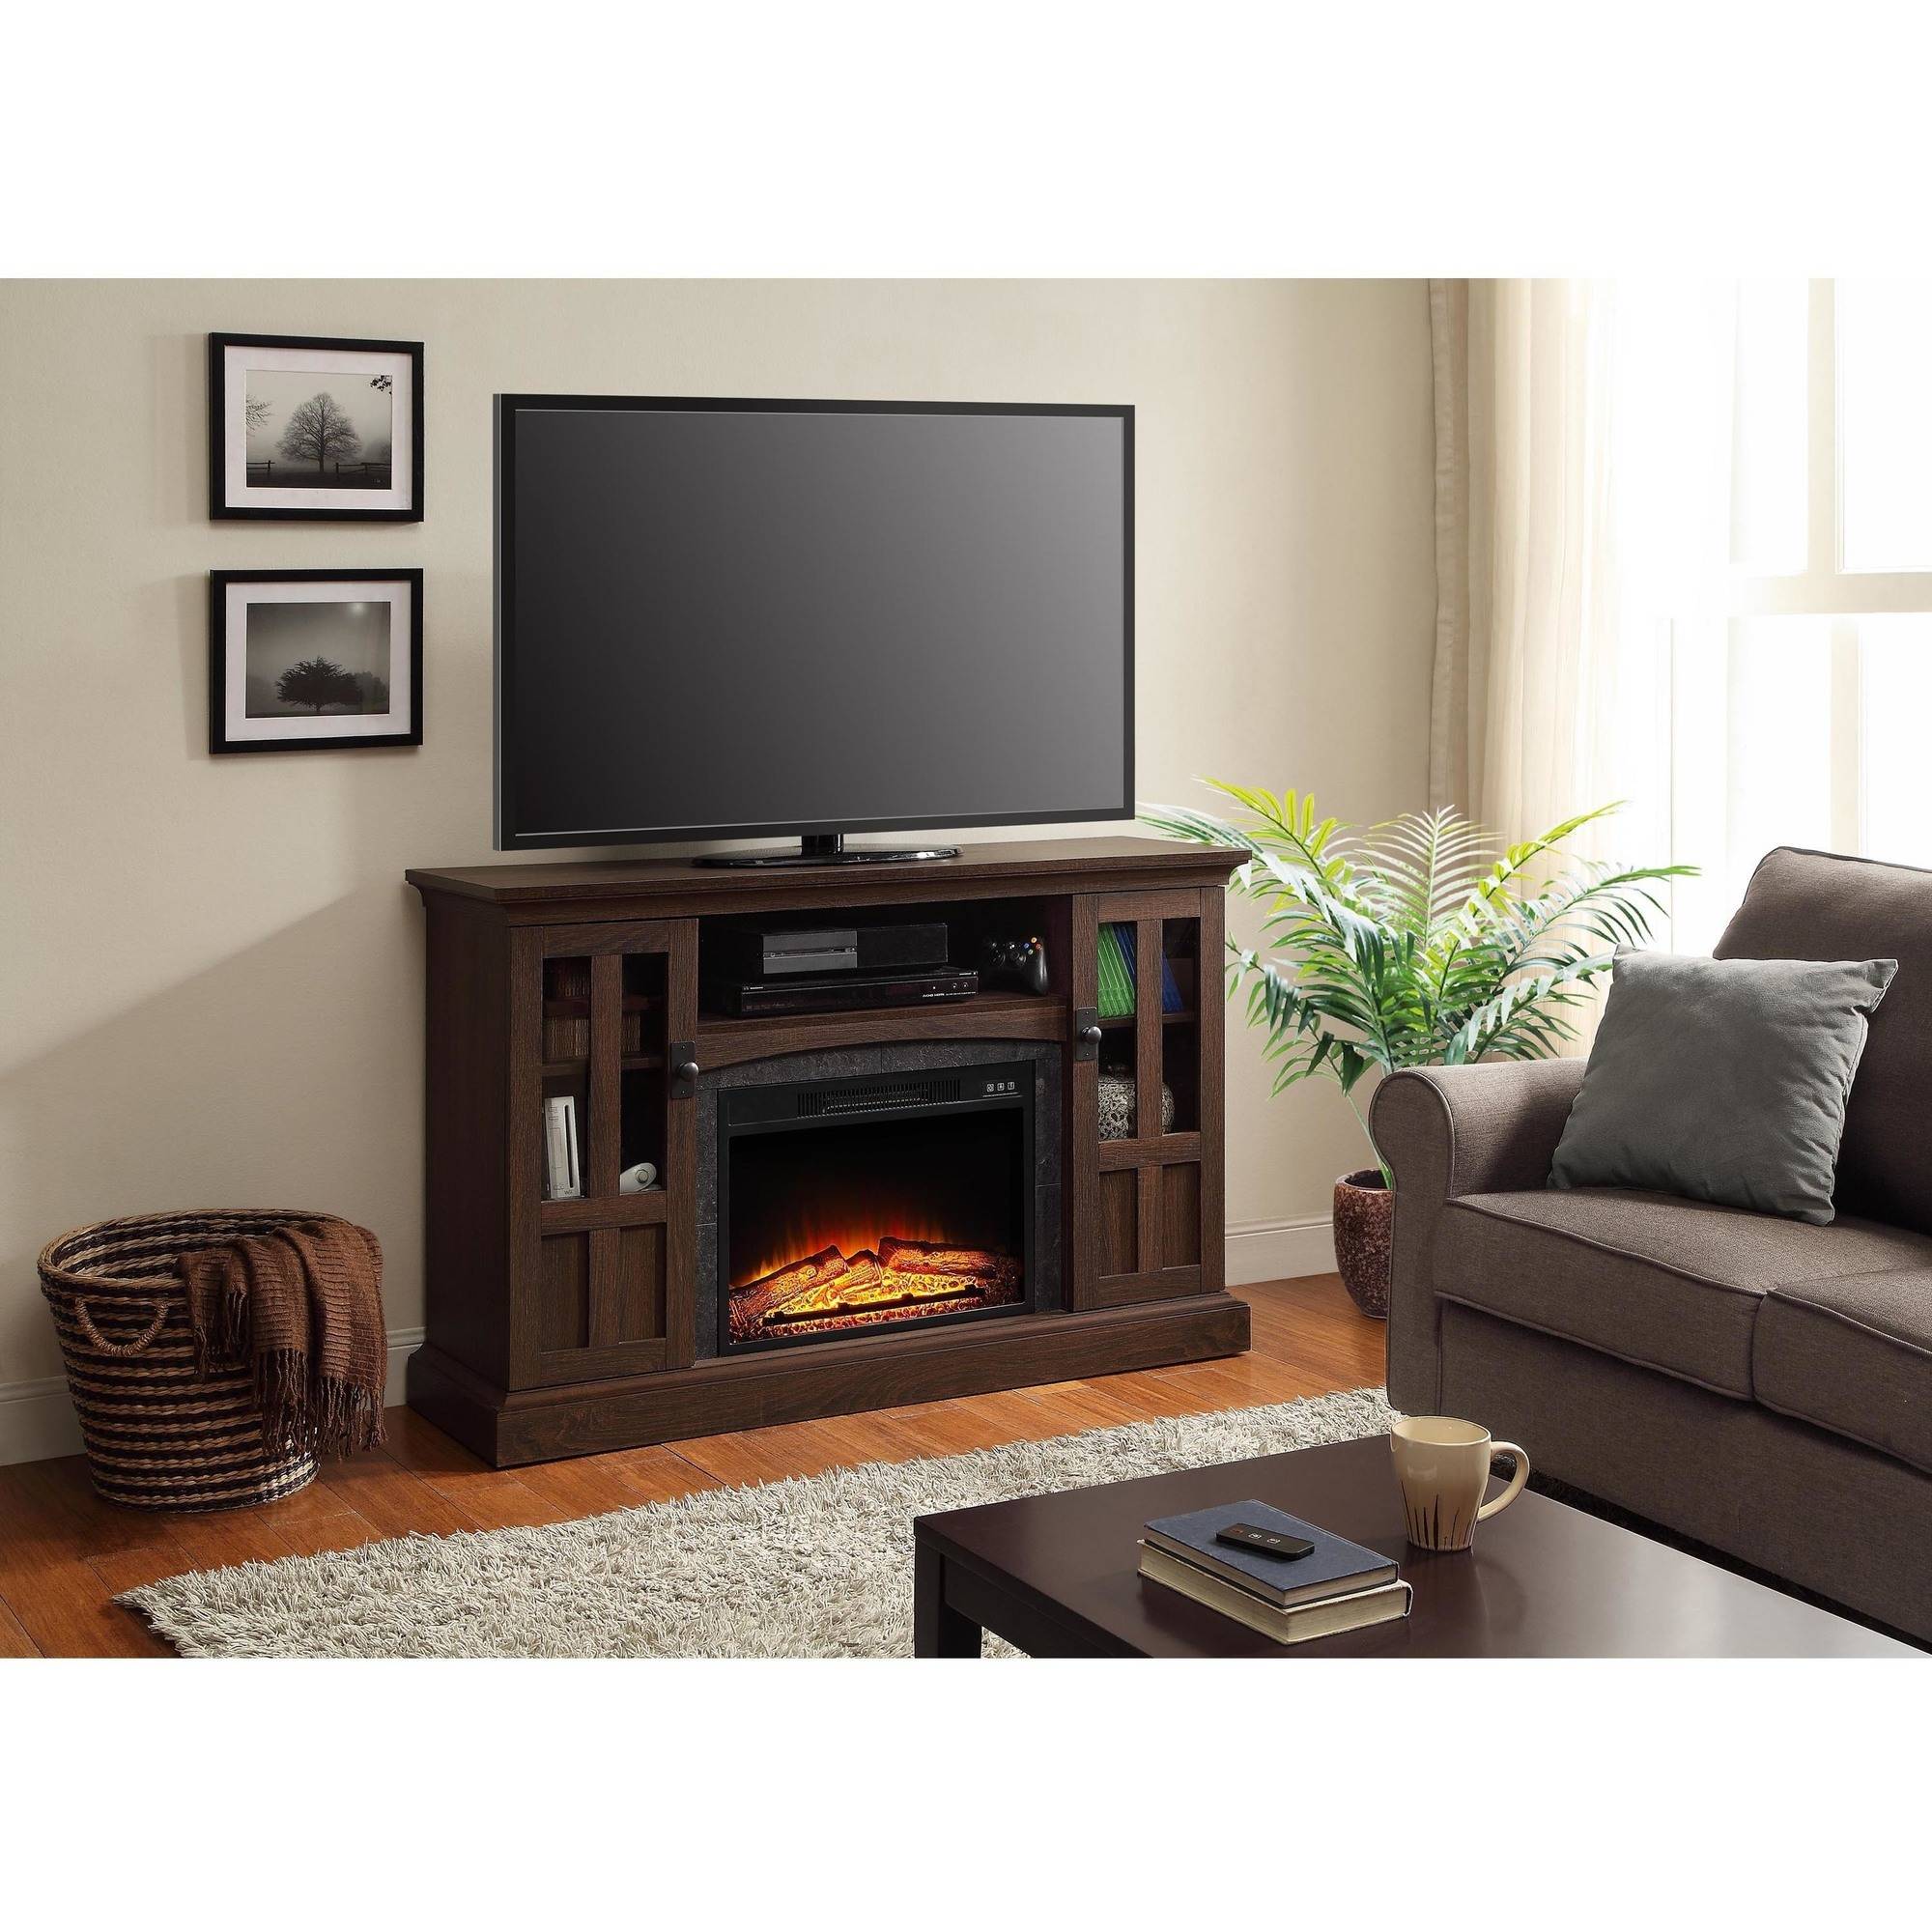 65 Inch Tv Over Fireplace Awesome Whalen Media Fireplace Console for Tvs Up to 60" Brown ash Walmart